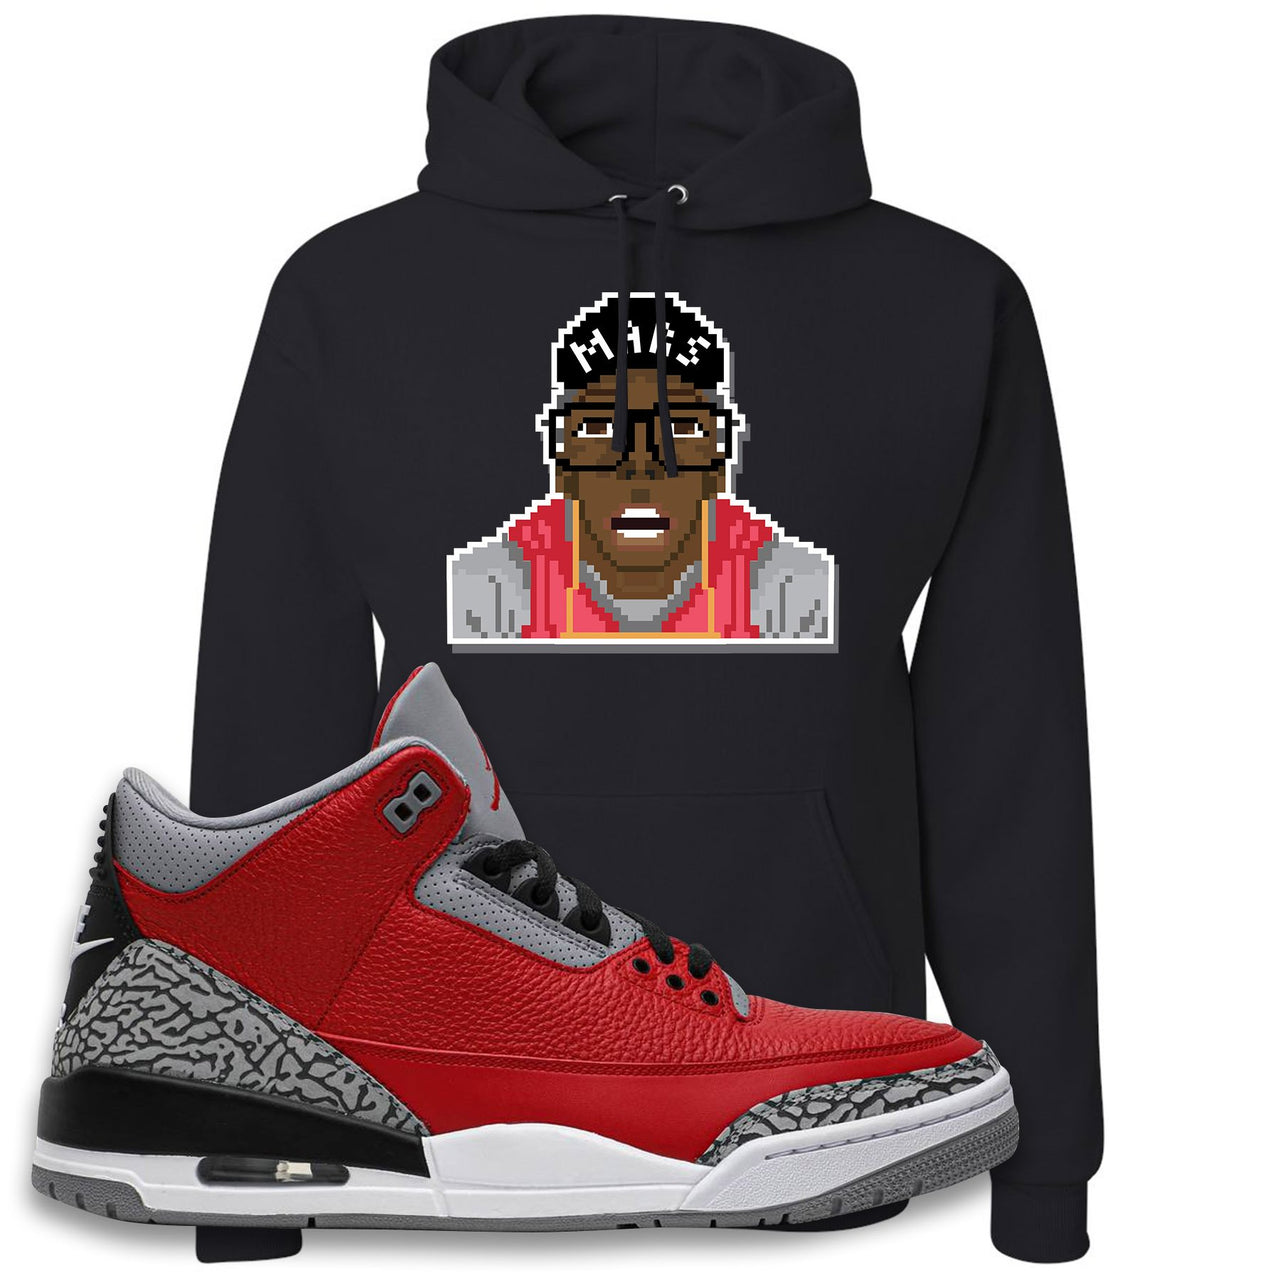 Jordan 3 Red Cement Chicago All-Star Sneaker Black Pullover Hoodie | Hoodie to match Jordan 3 All Star Red Cement Shoes | Mars Pixel